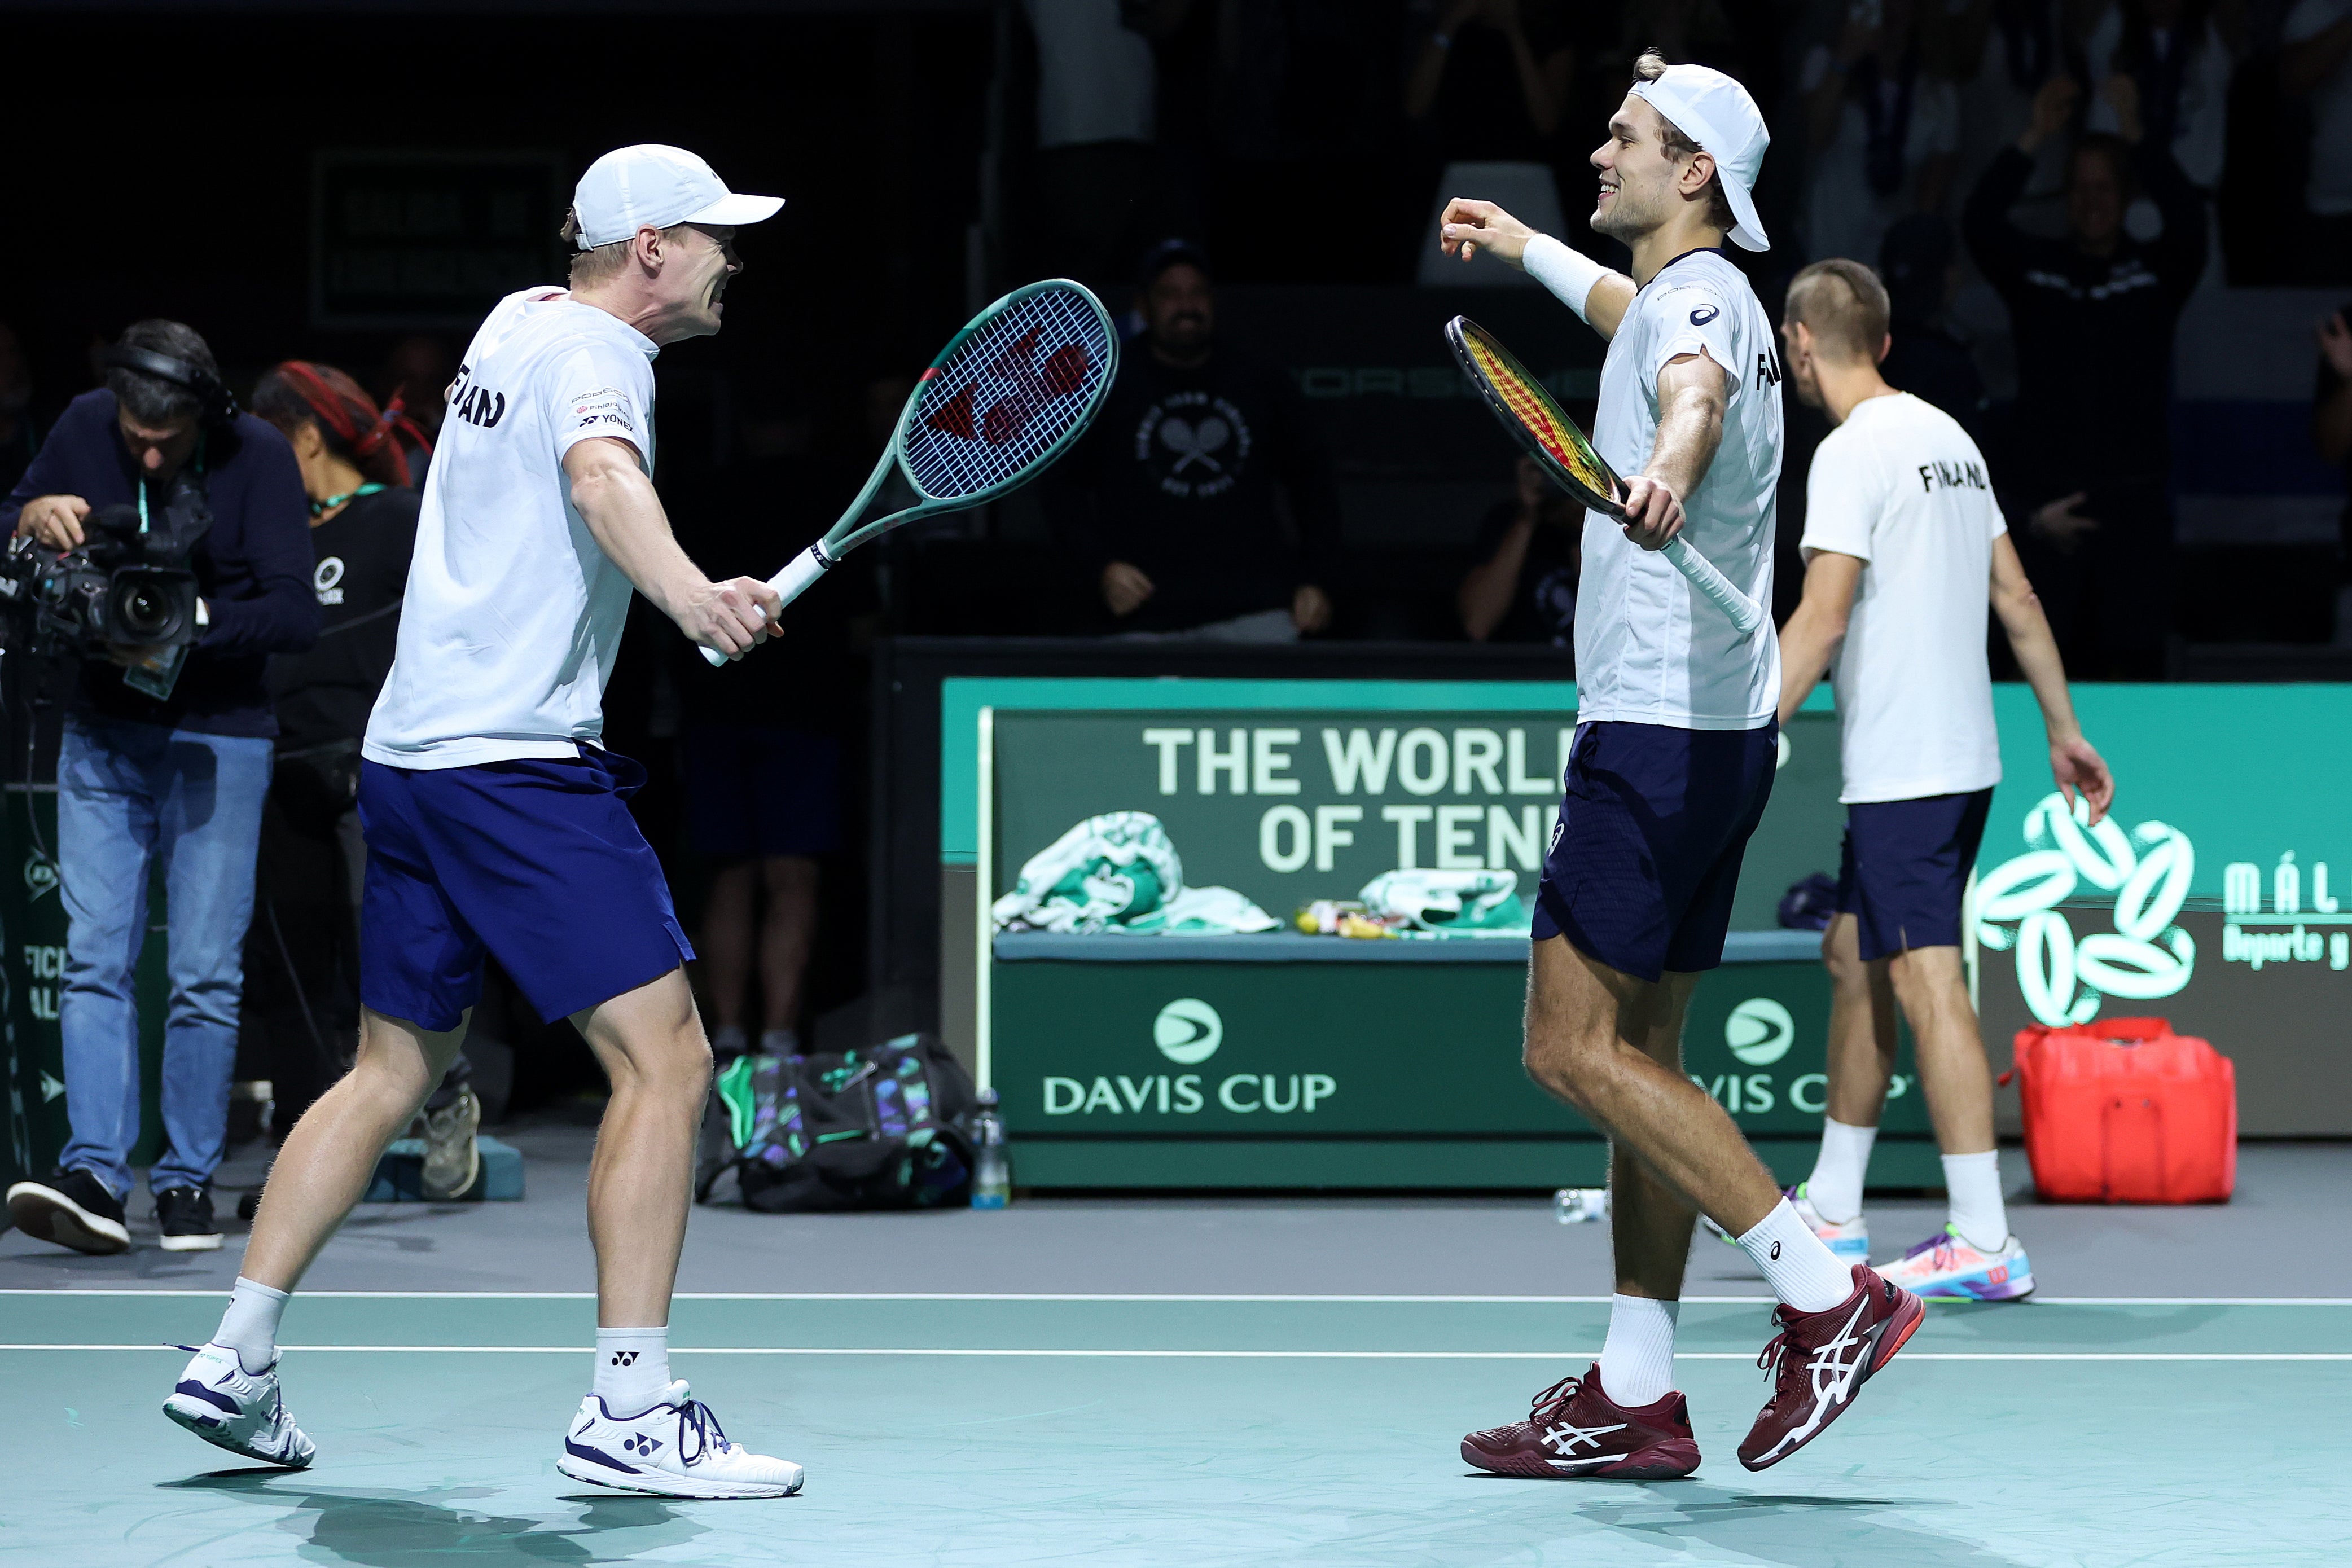 Finland defeated Canada to reach the Davis Cup semi-finals